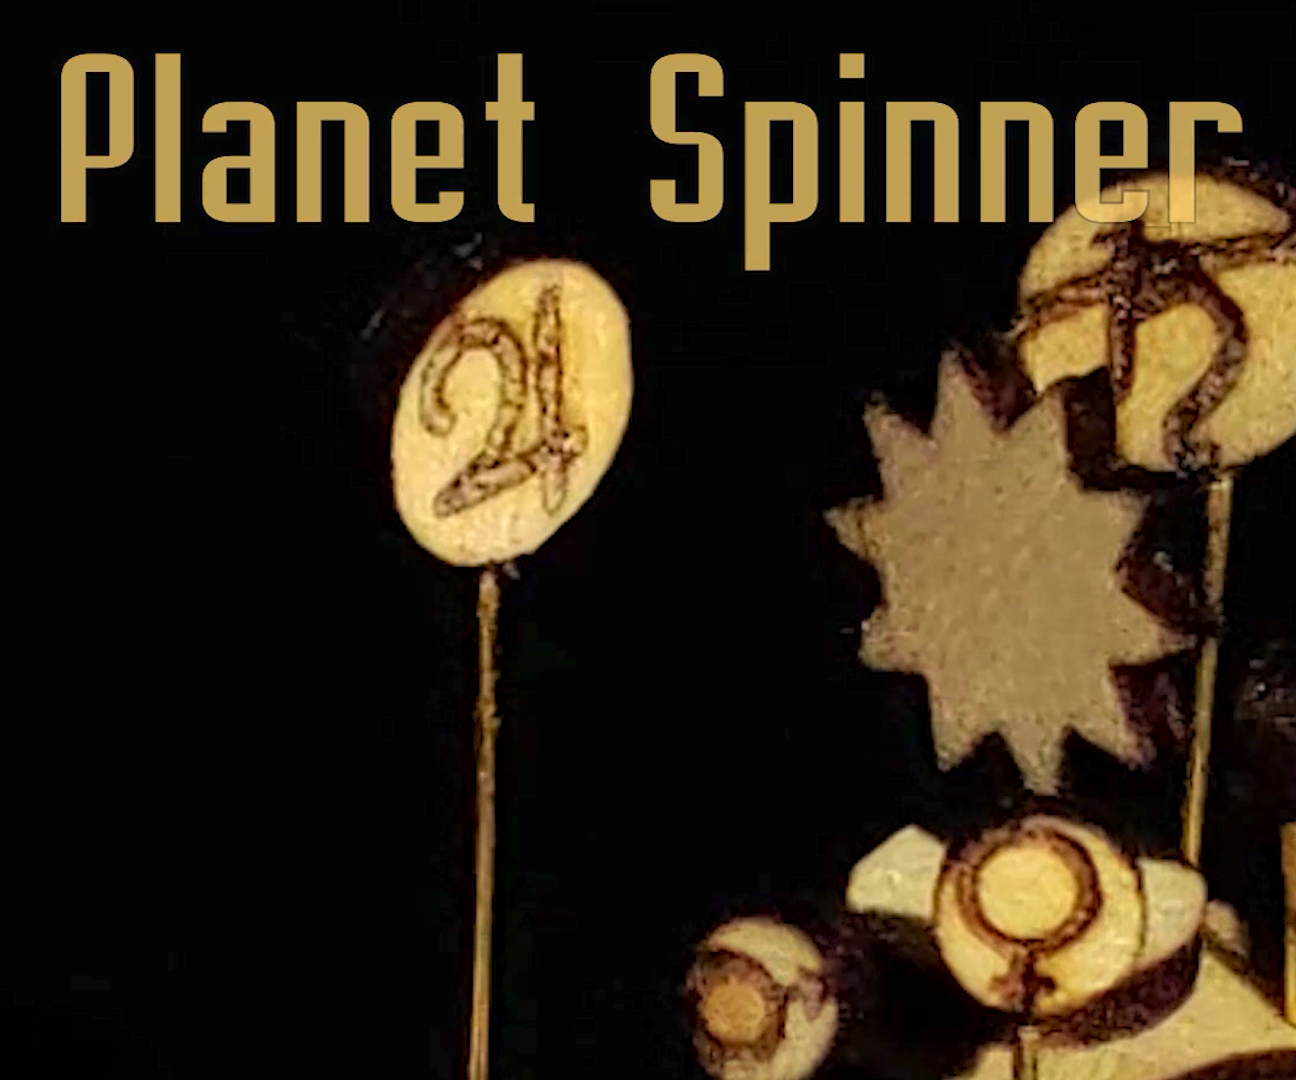 Planet Spinner, a Magical Orrery?